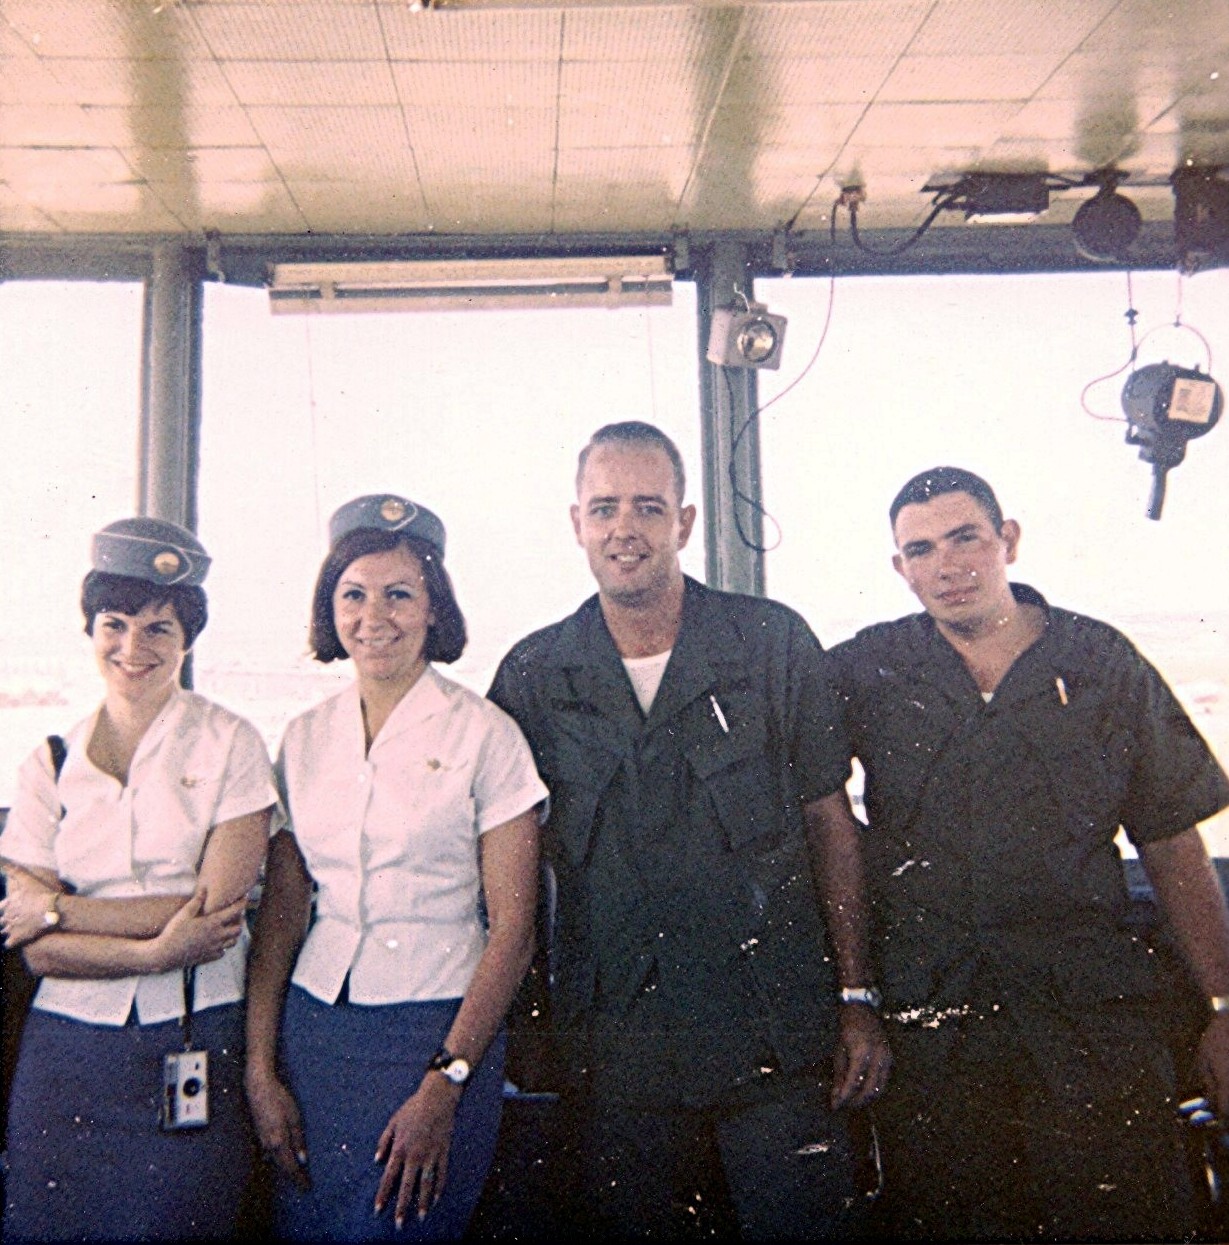 1968 Saigon Vietham airport control tower, Maureen van Leeuwen second from left with Flight Service colleague and US military control tower staff